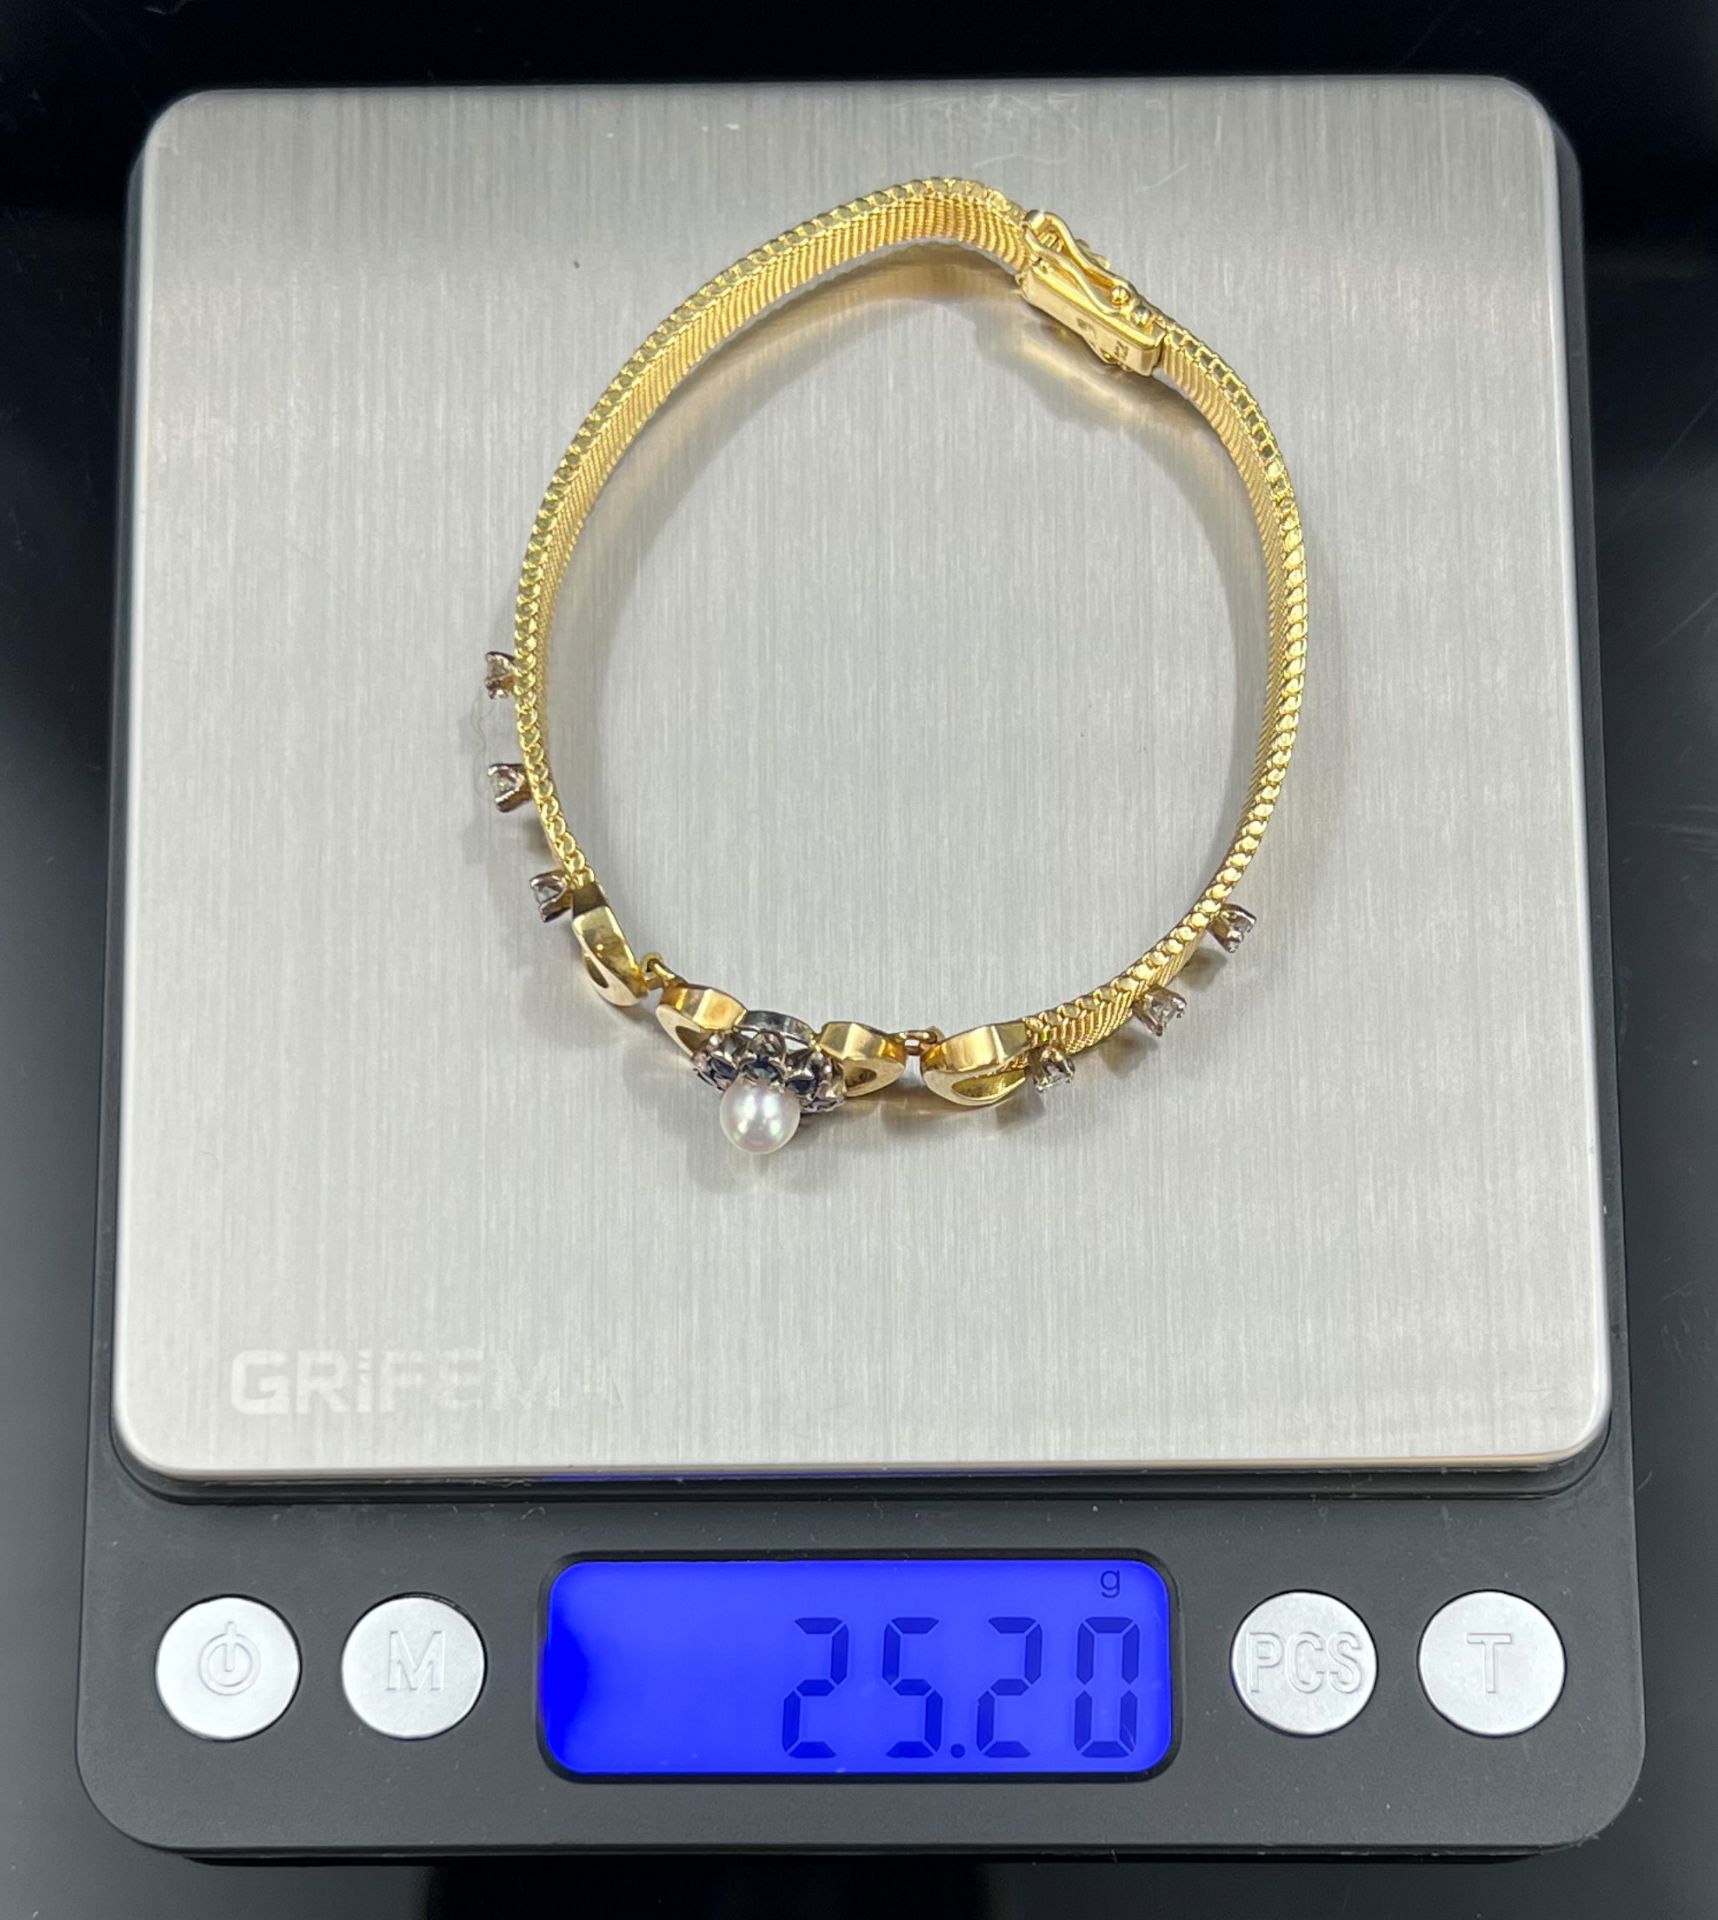 Bracelet. 750 yellow gold with diamonds, sapphires and a pearl. - Image 5 of 5